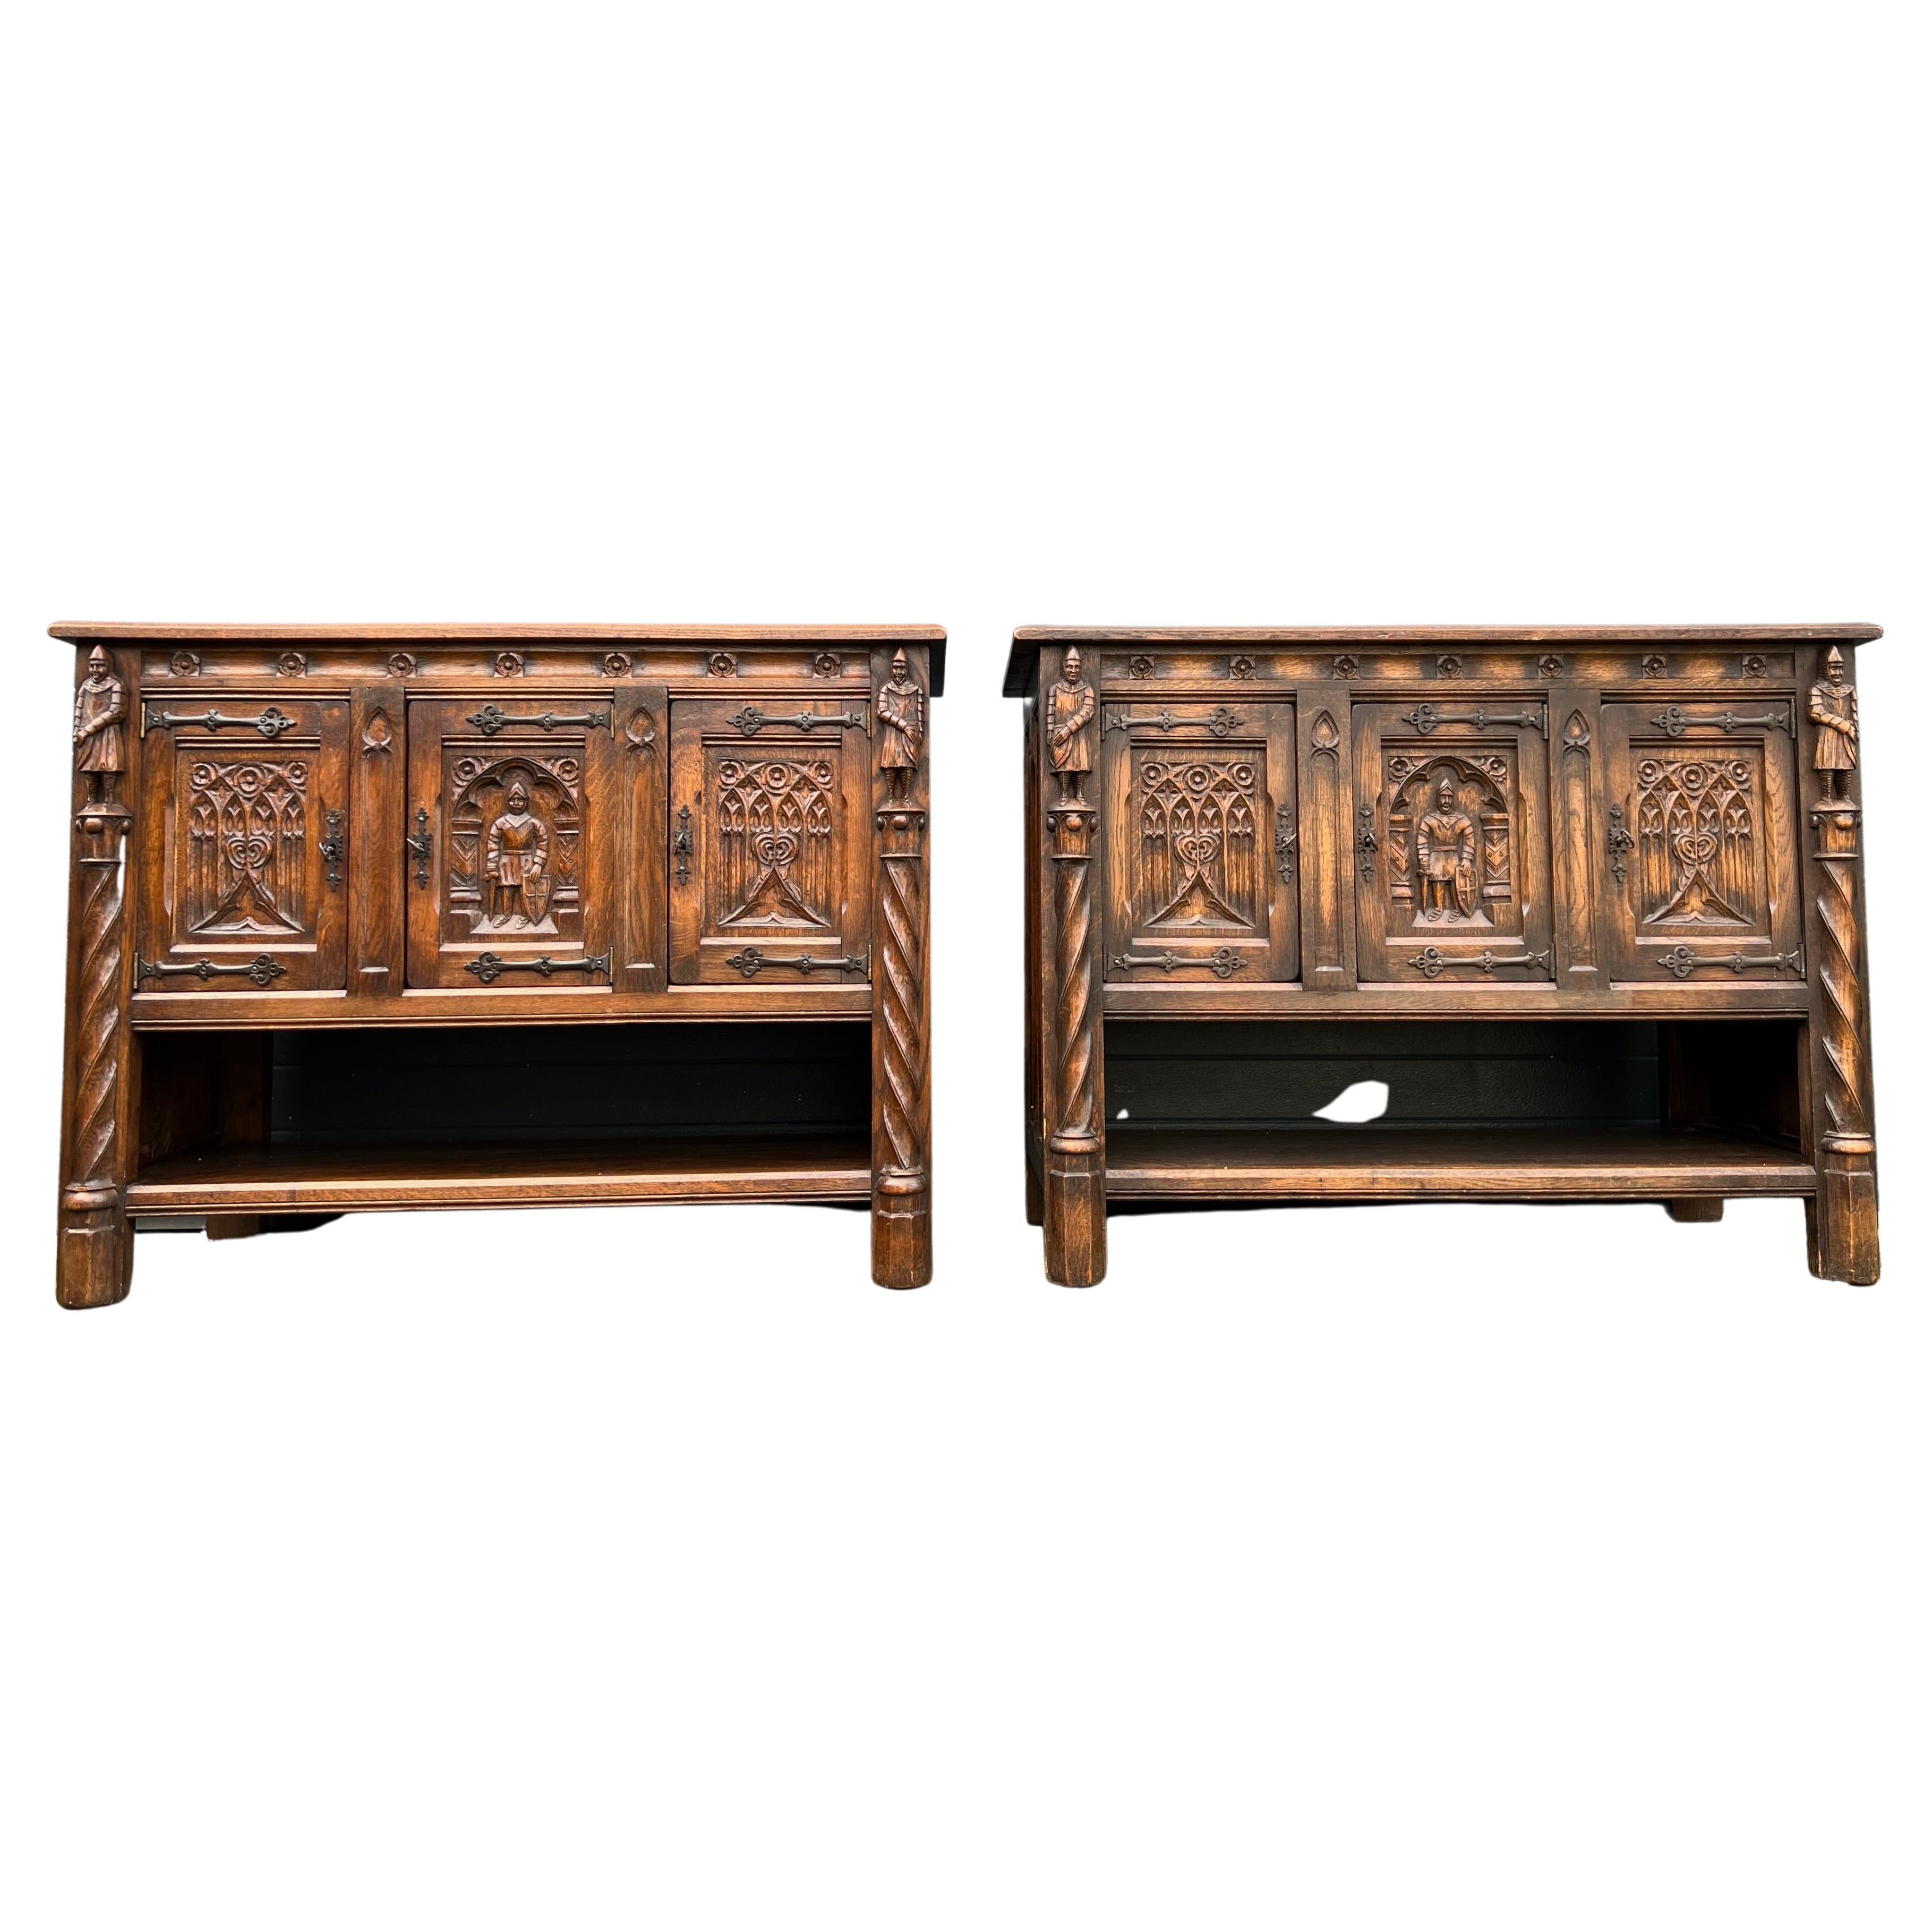 Pair Gothic Revival Hand Carved Solid Oak Credenzas with Church Panels & Knights